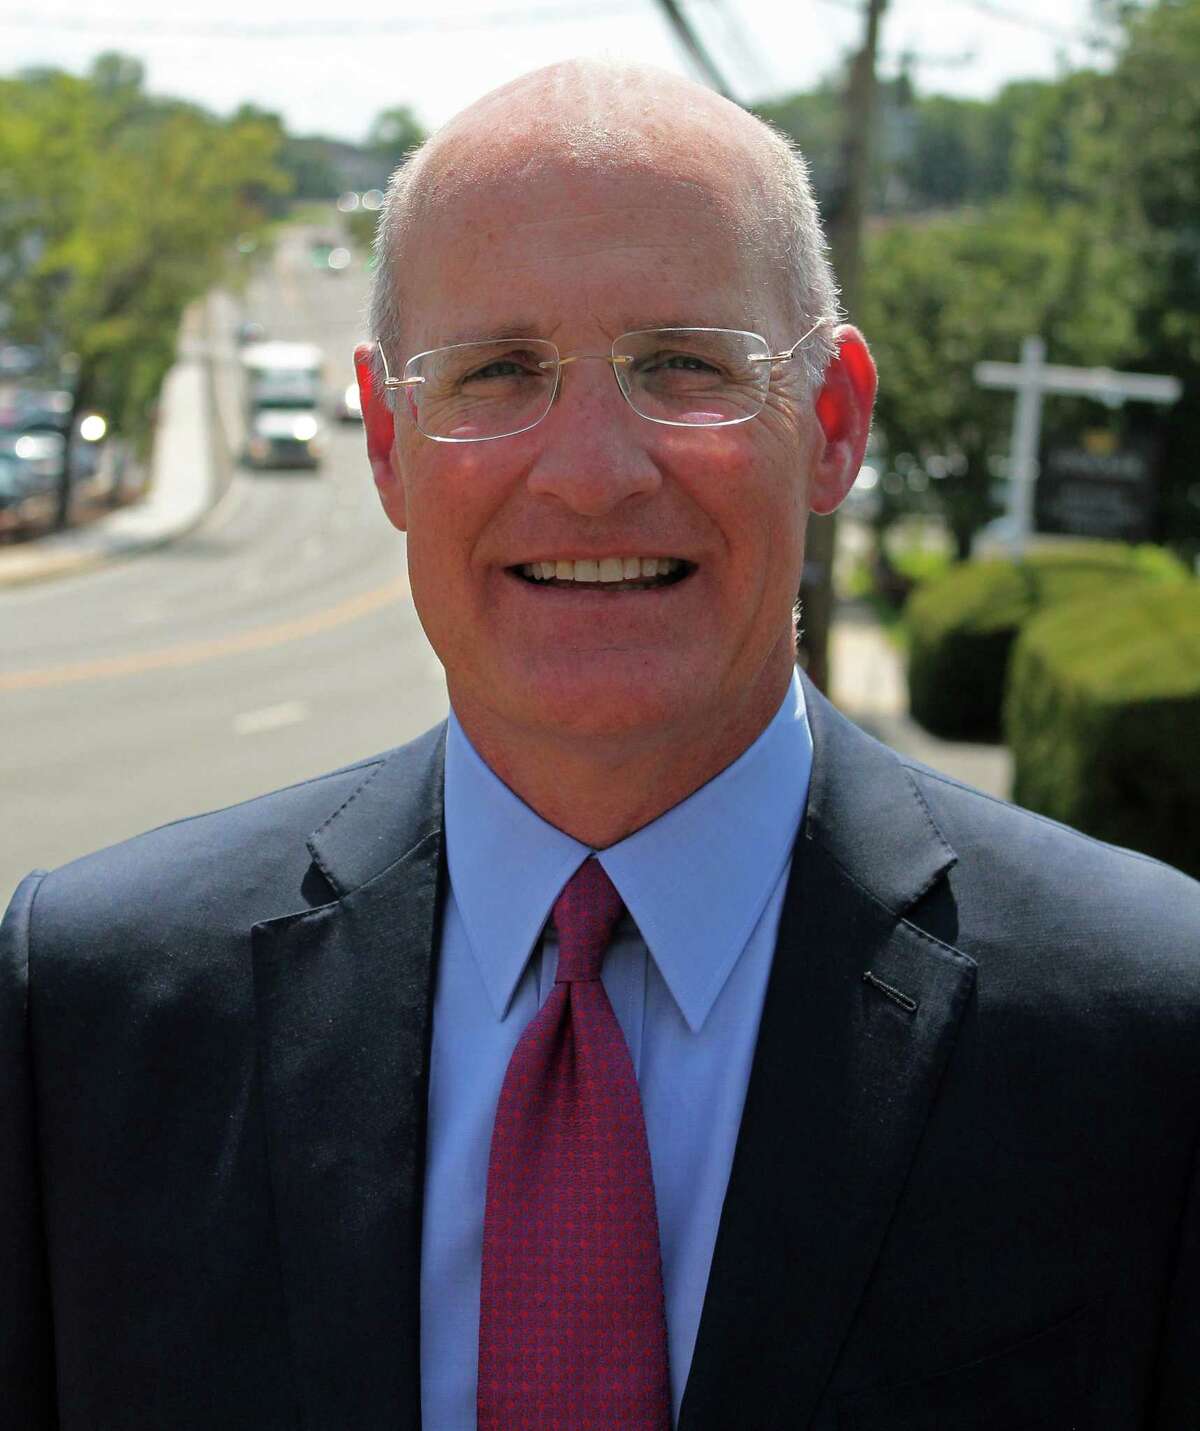 Greenwich resident Andy Sieg is president of Merrill Lynch Wealth Management.